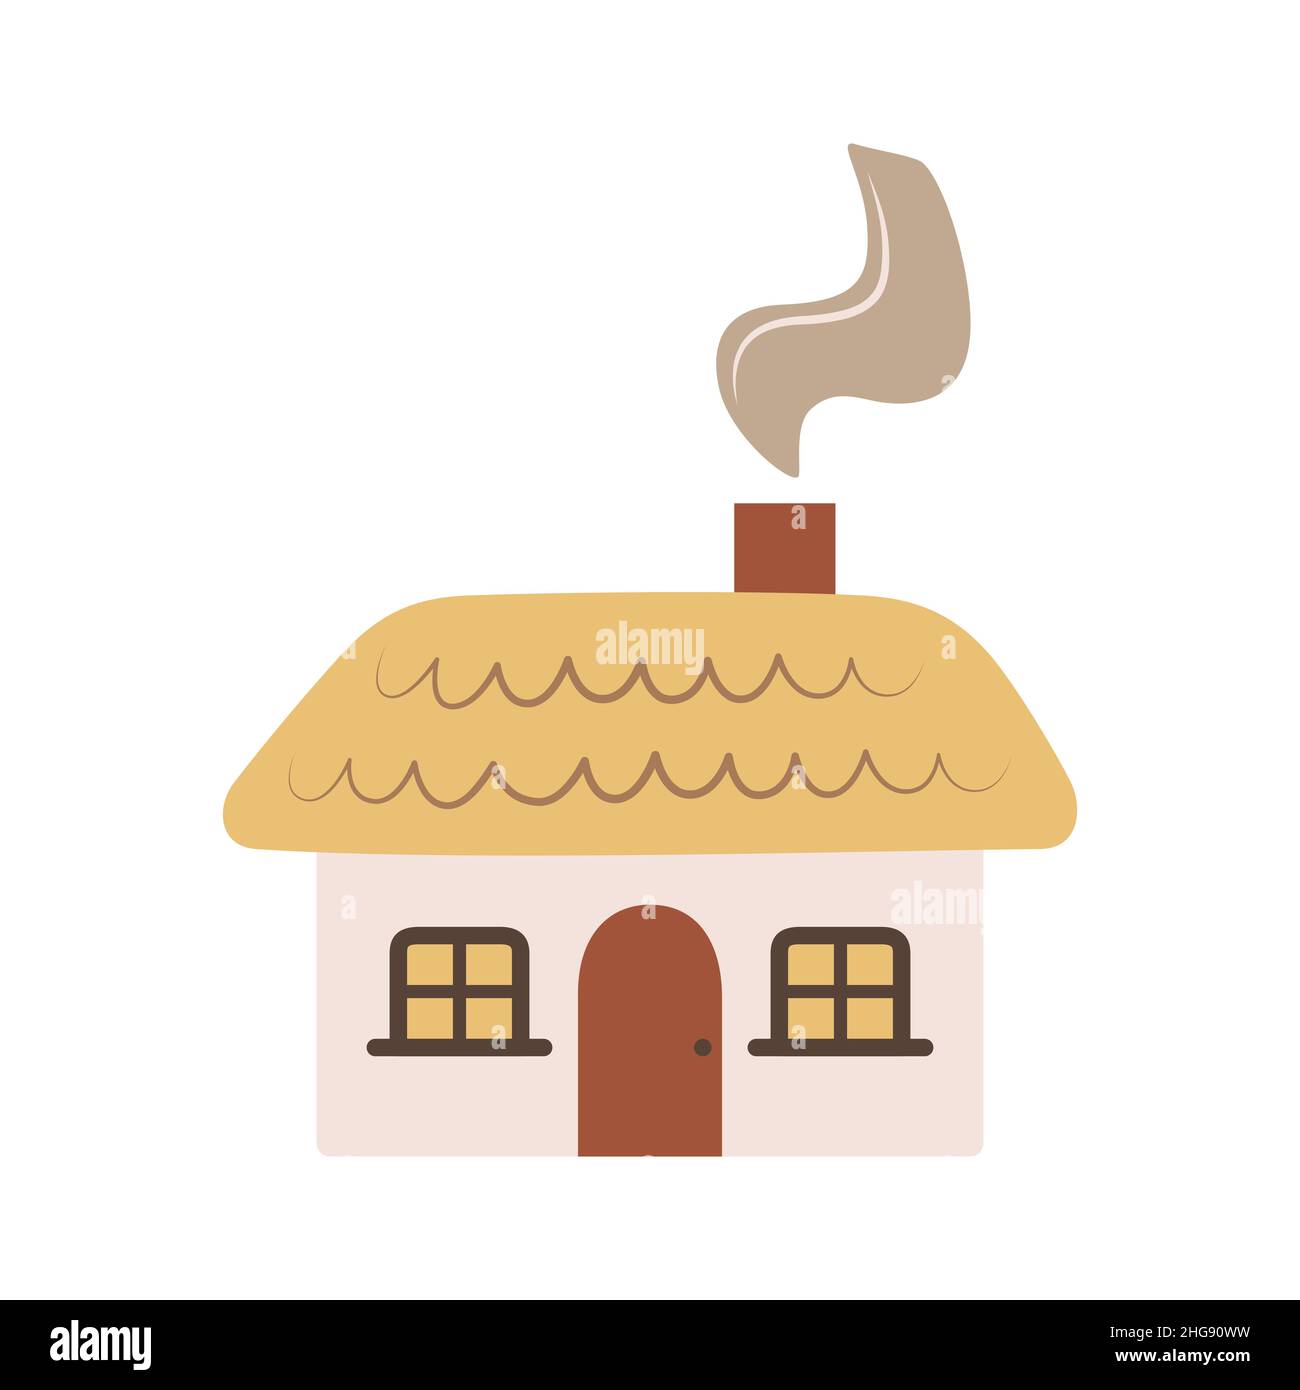 Cute cartoon village hut. Little doodle house. Rural life item. Thatched roof, smoke chimney. Beautiful farmer icon. Simple flat illustration Stock Vector